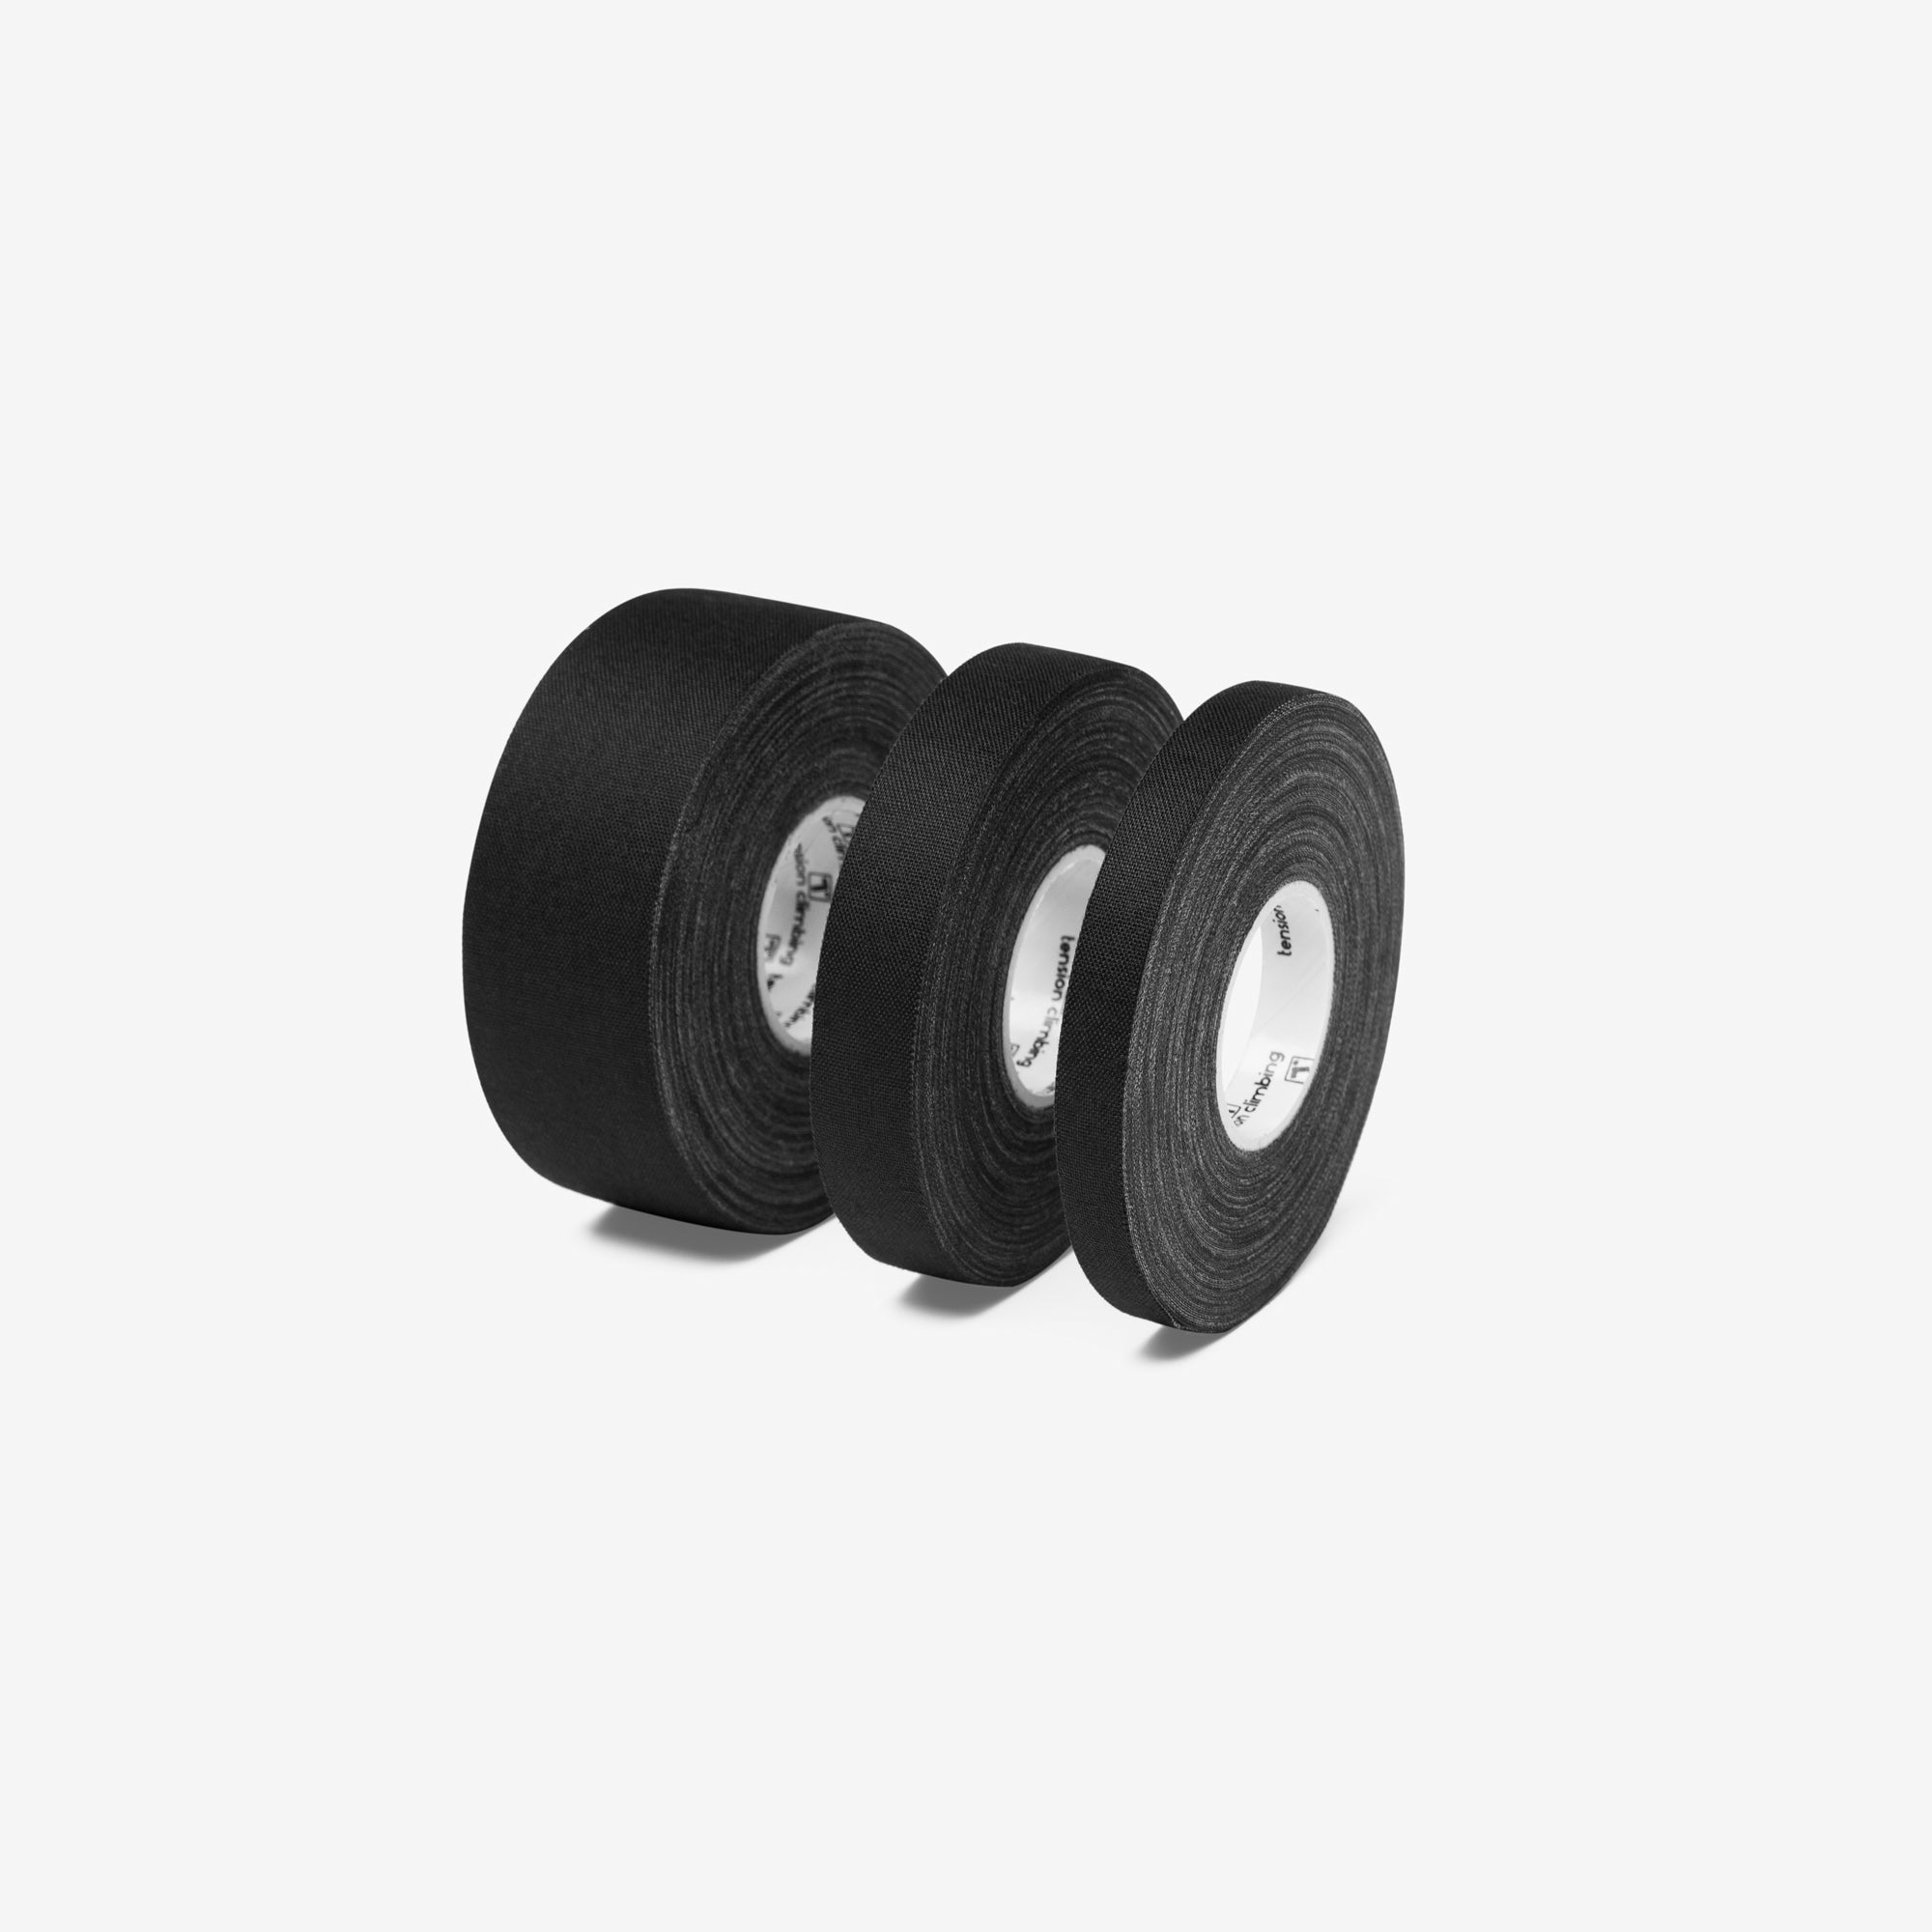 Tension Climbing Tape Pack, .3 Pack